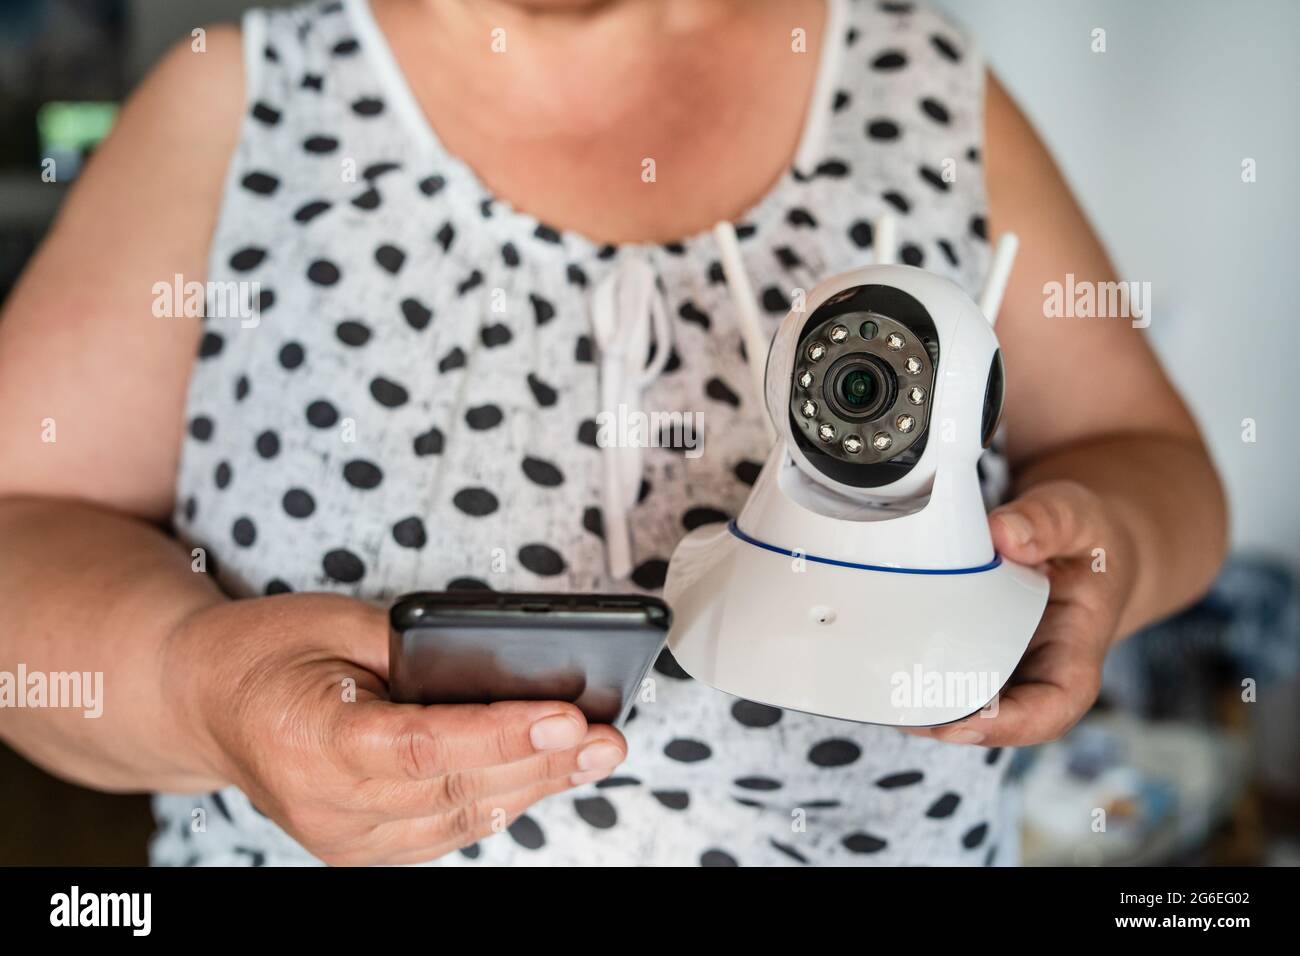 Close up on midsection of unknown woman holding home security surveillance camera and mobile phone trying to install an app front view copy space Stock Photo